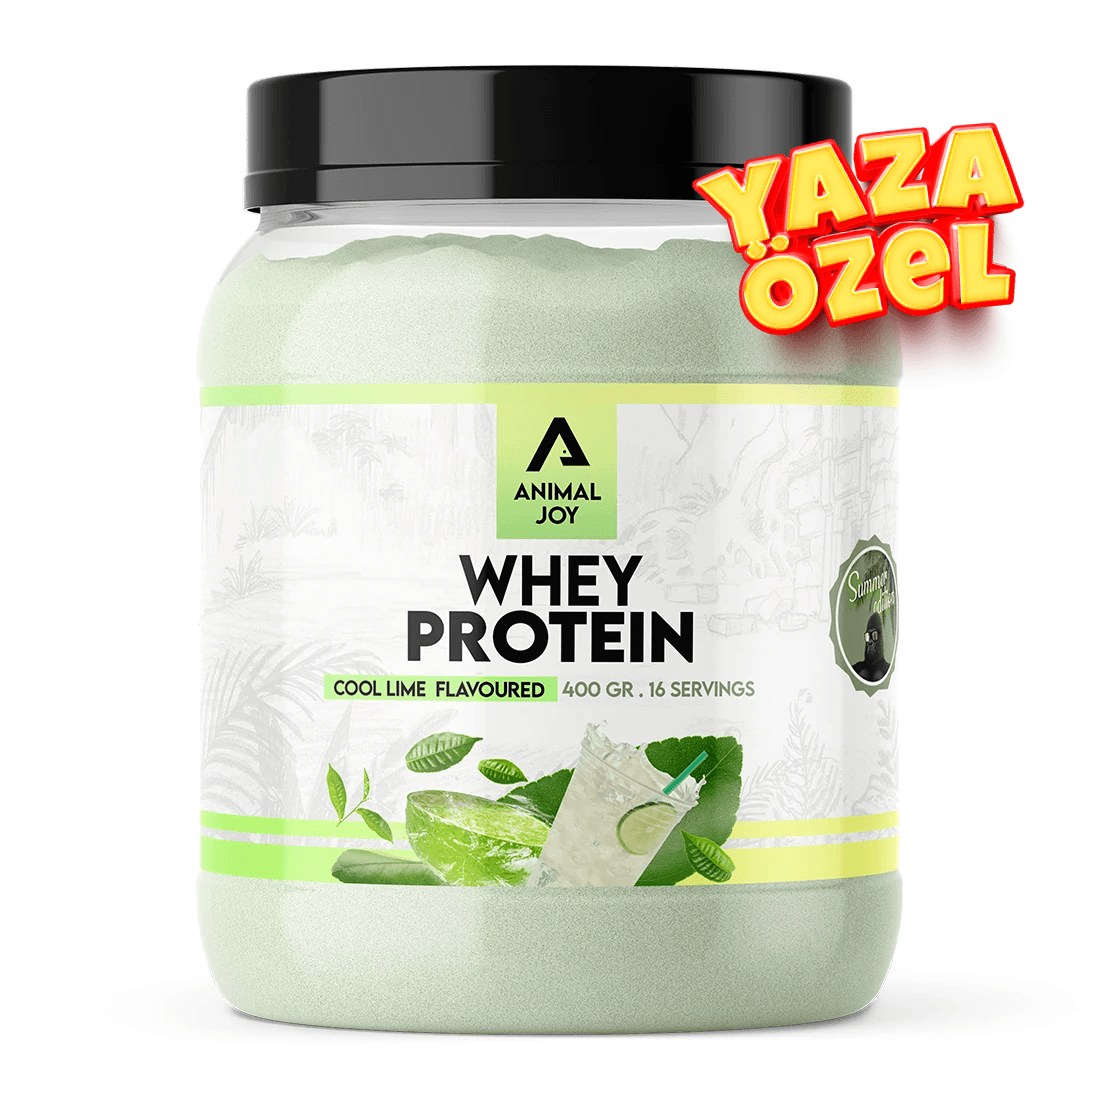 WHEY PROTEIN - Cool Lime